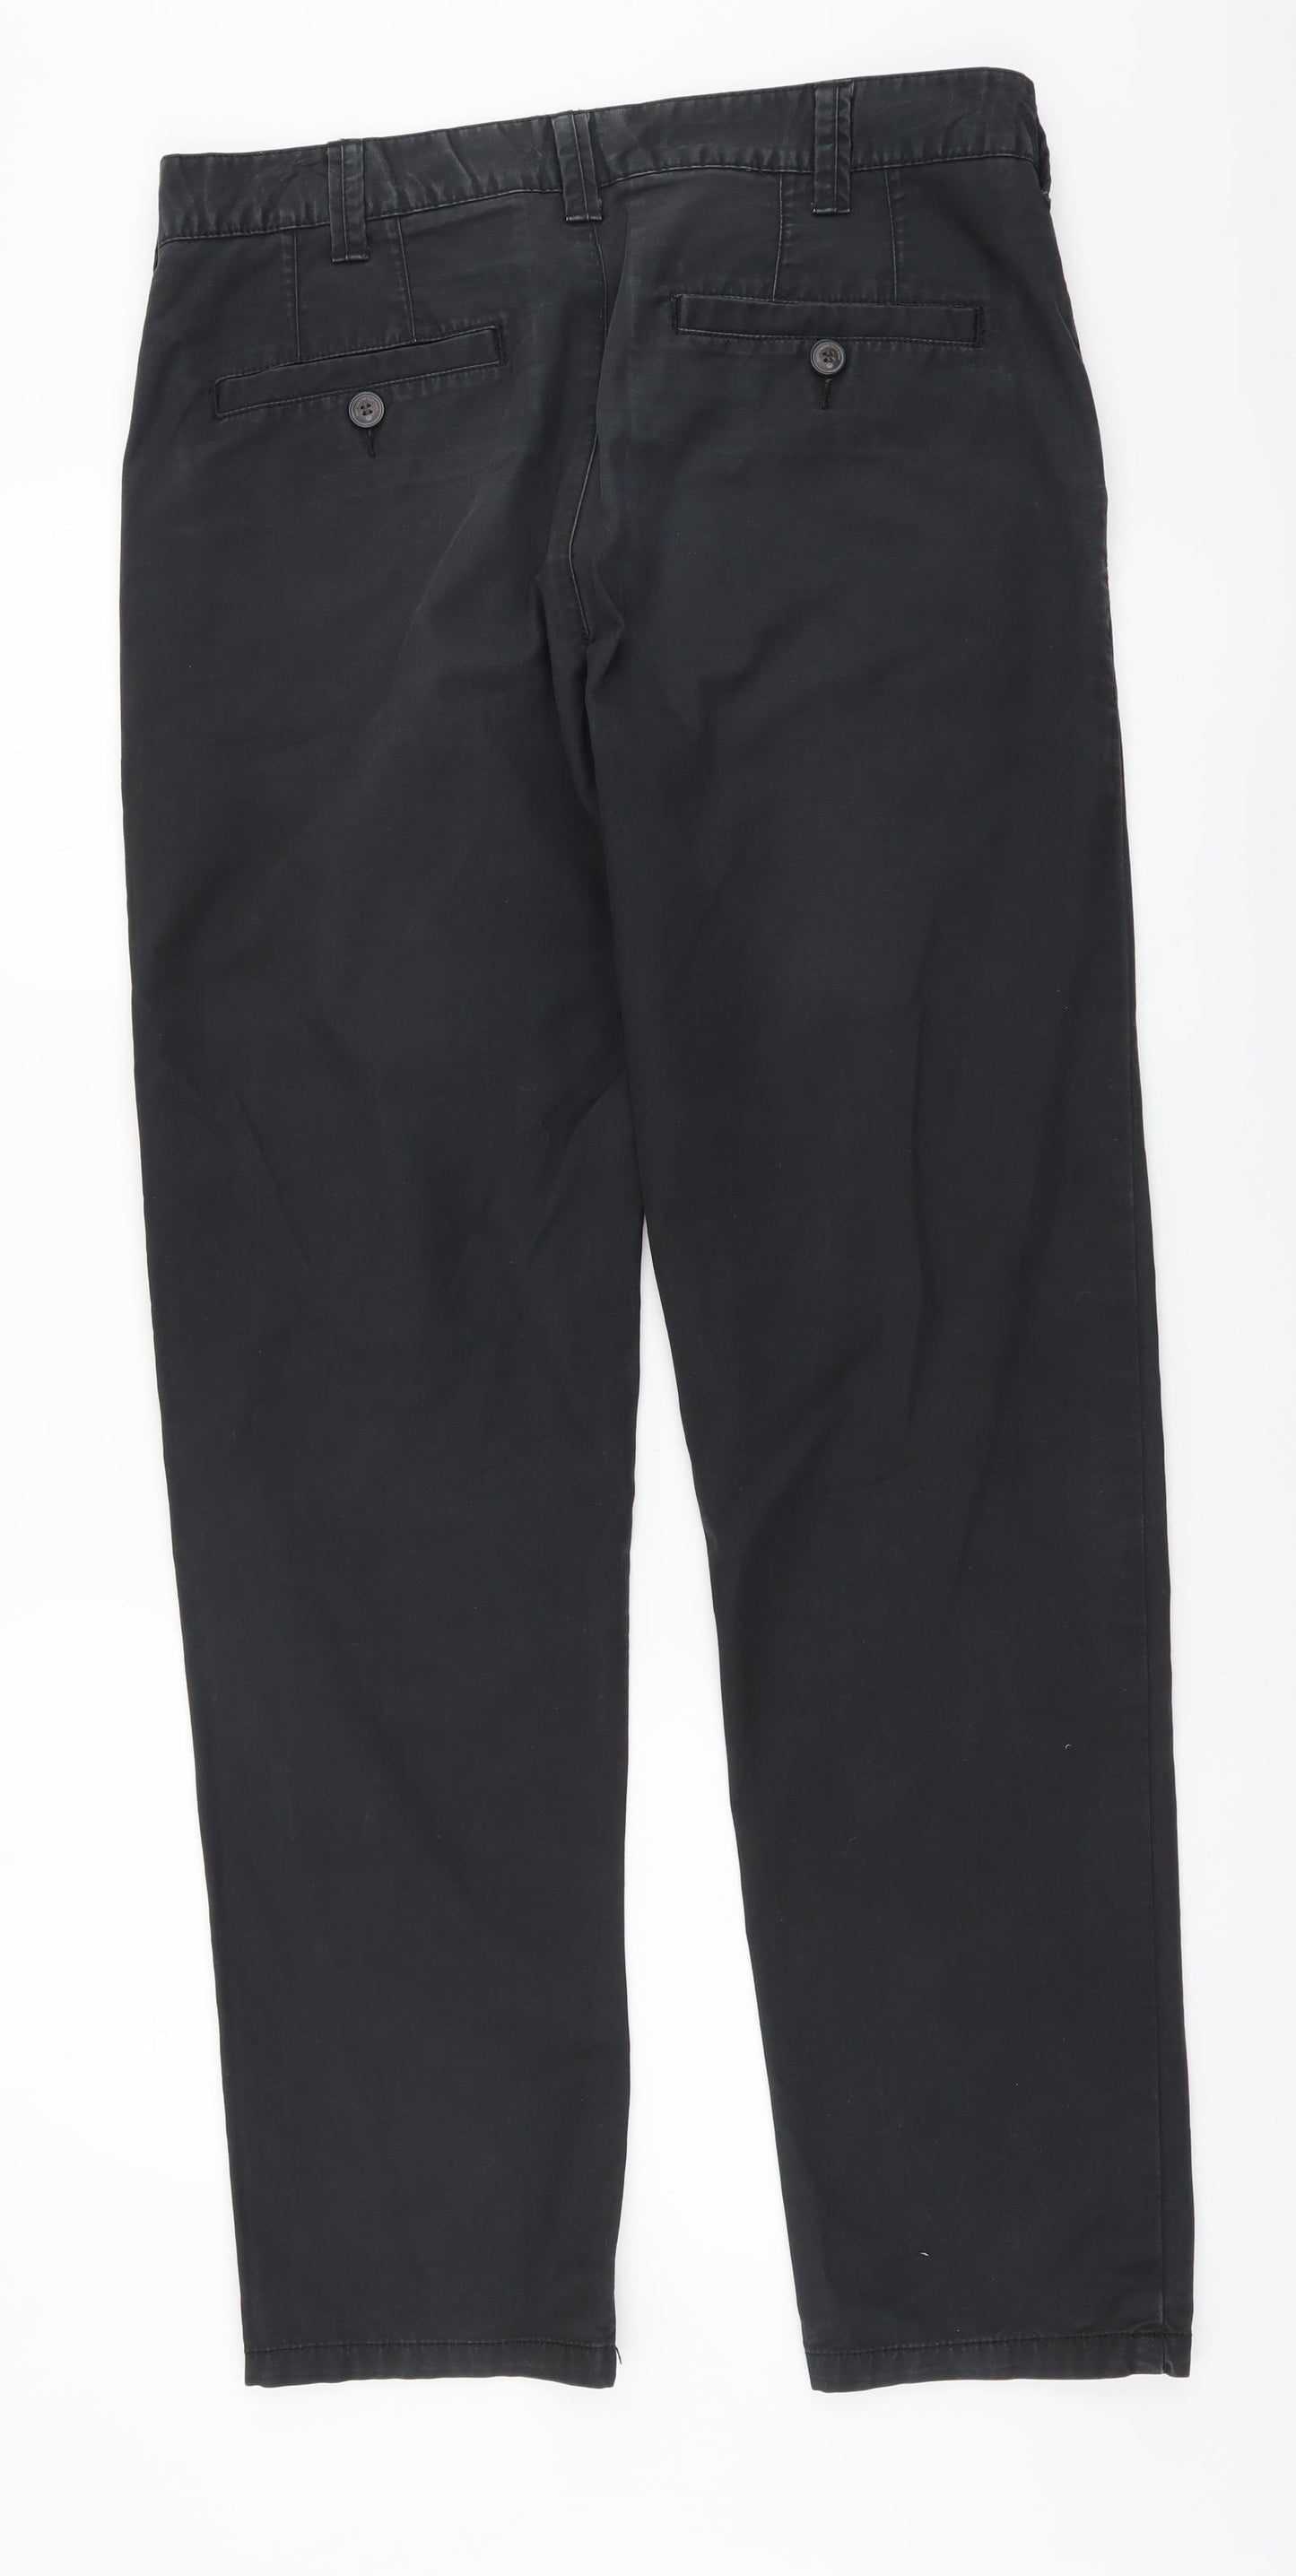 Easy Mens Grey Cotton Trousers Size 32 in L31 in Regular Button